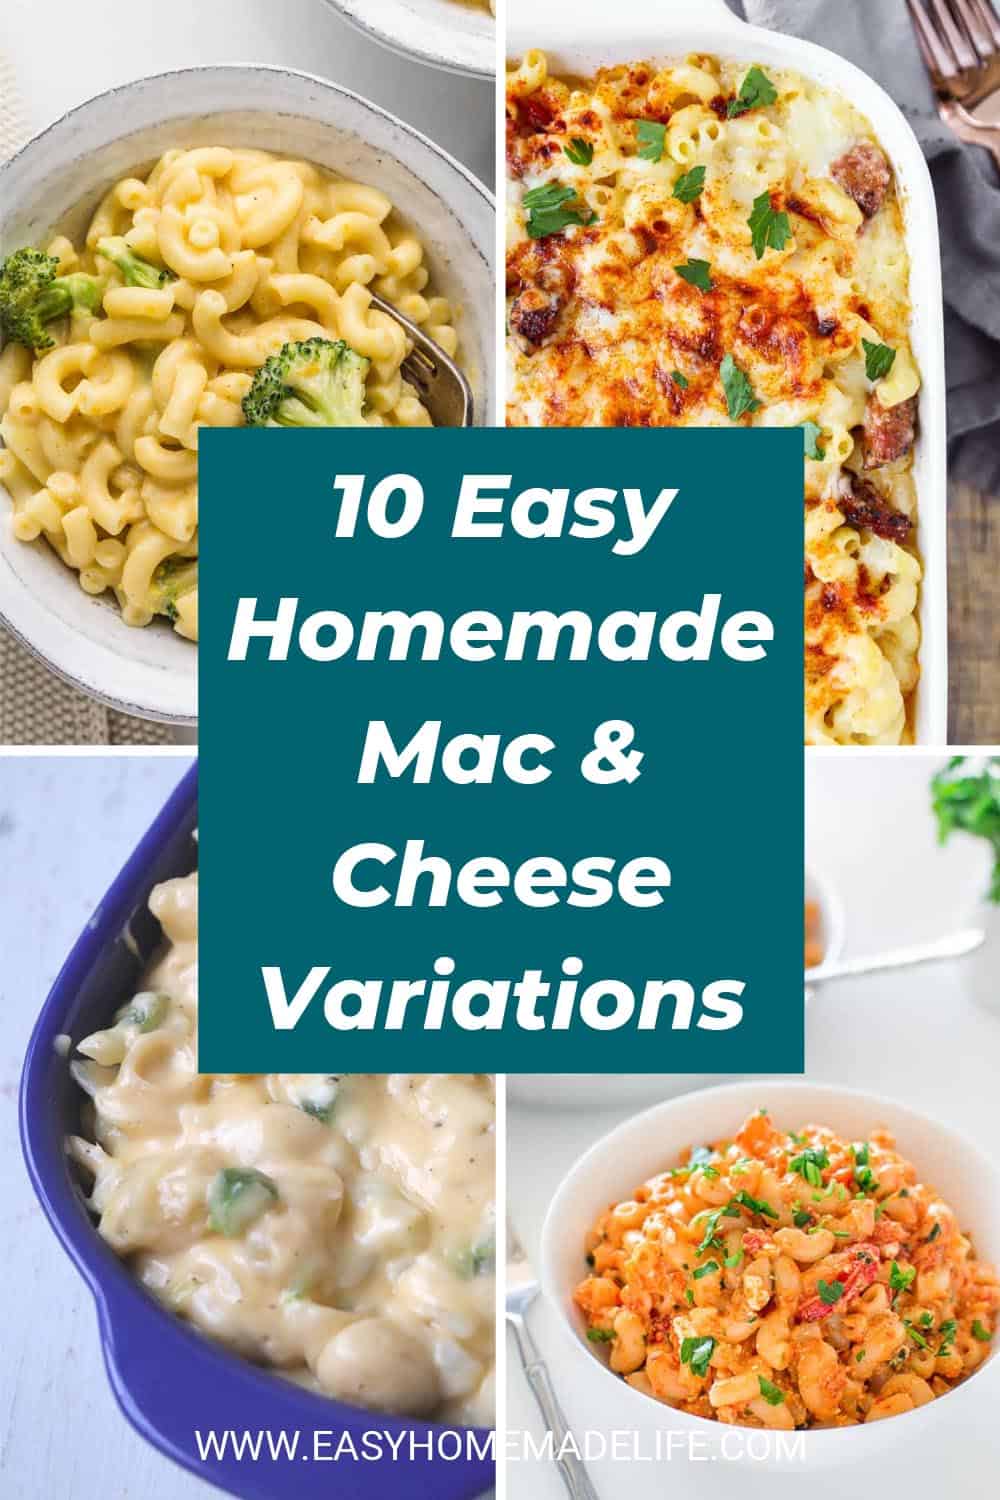 10 Creative Takes on Mac and Cheese (Easy Homemade Variations!)